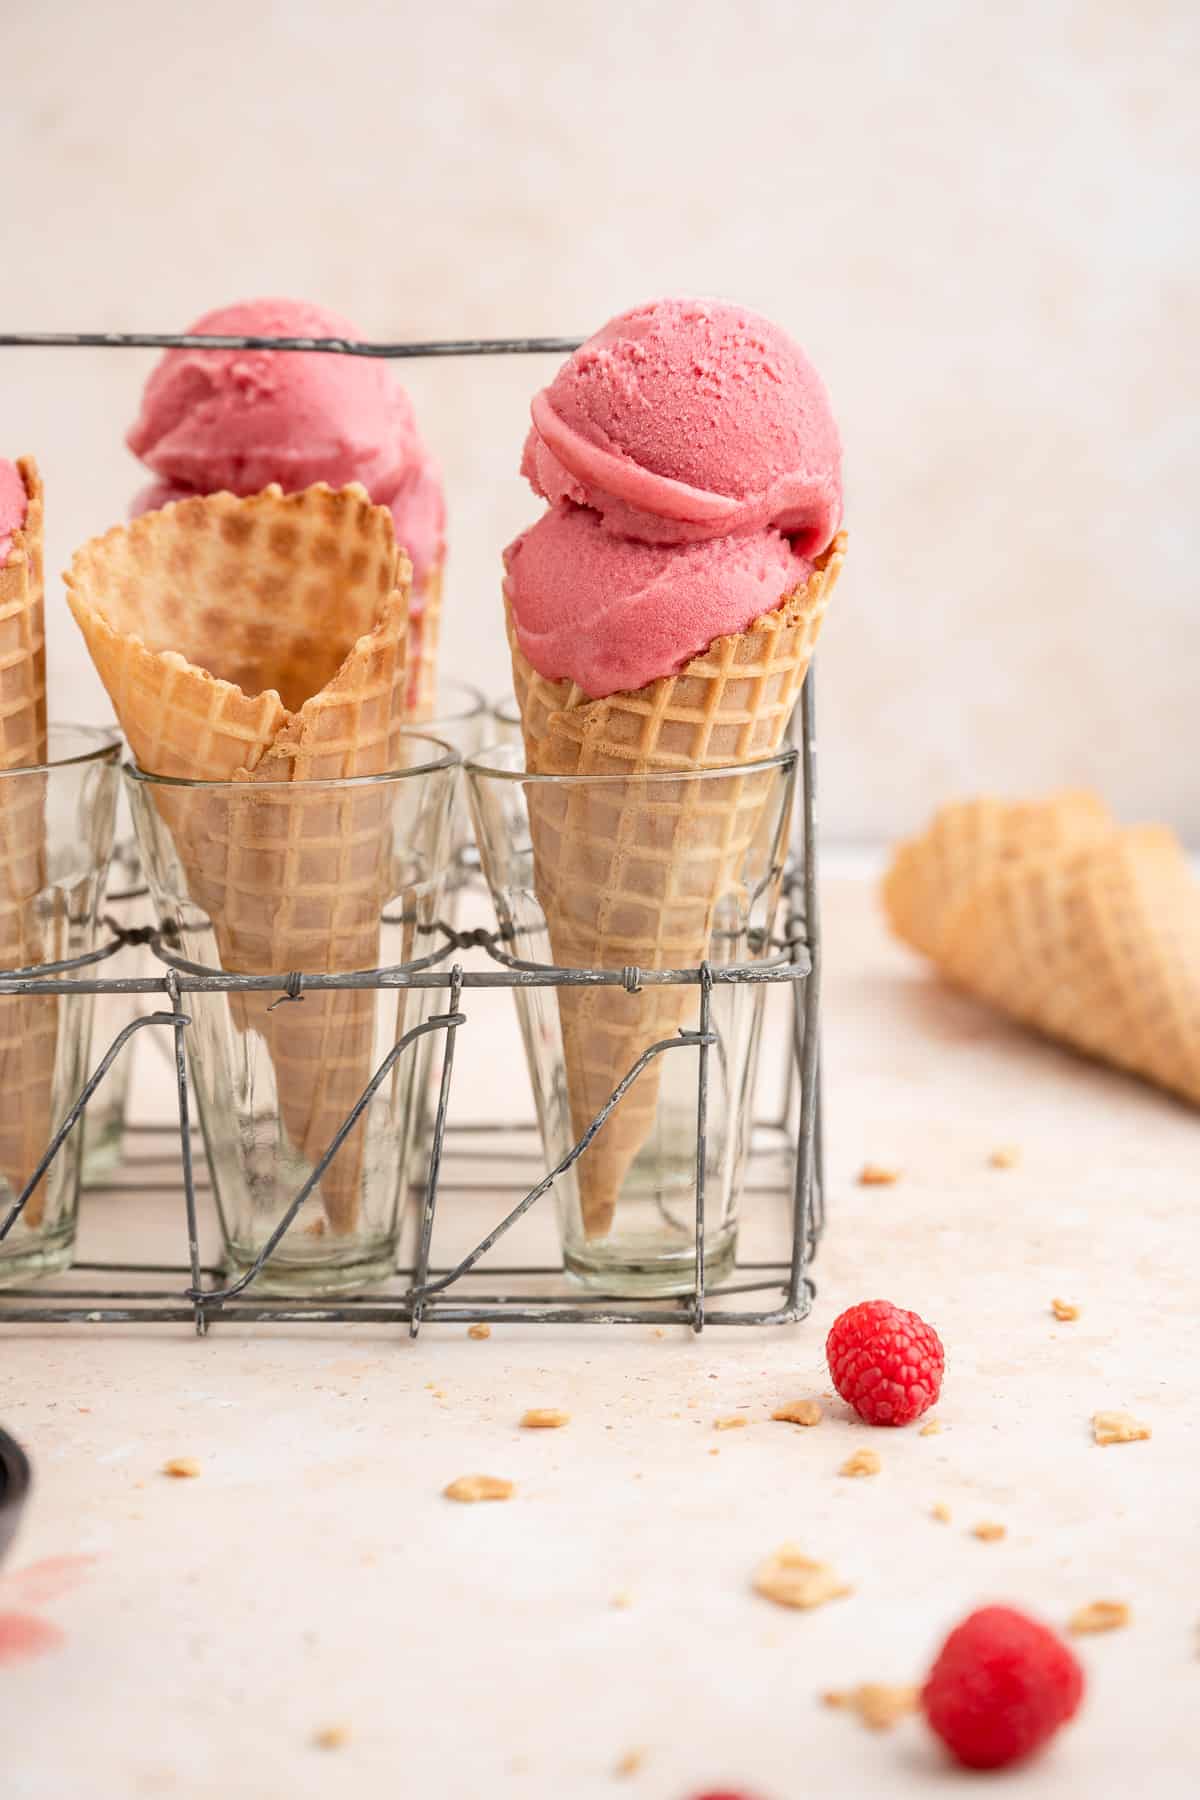 two raspberry sorbet scoops on a cone. 